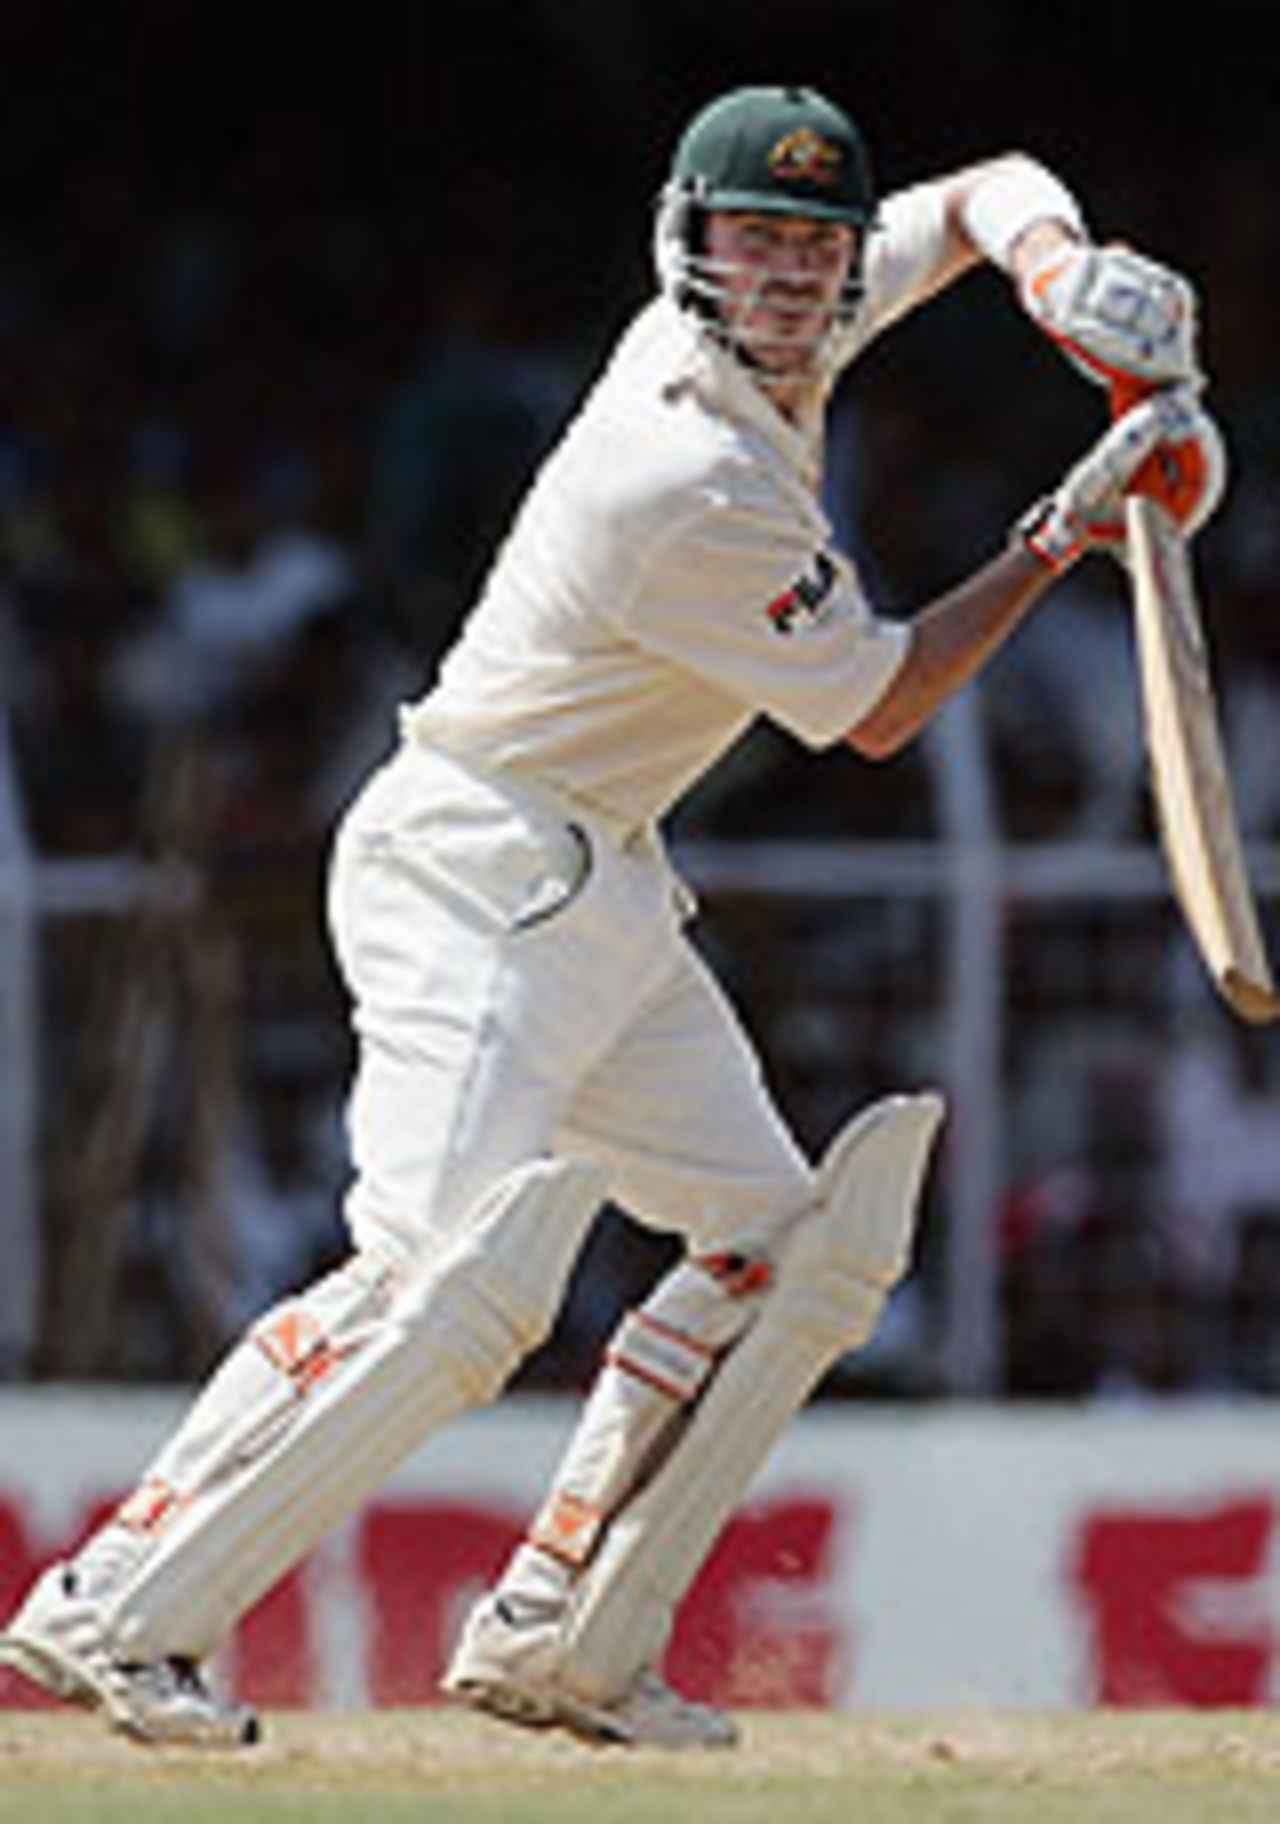 Damien Martyn drives the ball, India v Australia, 2nd Test, Chennai, 4th day, October 17, 2004